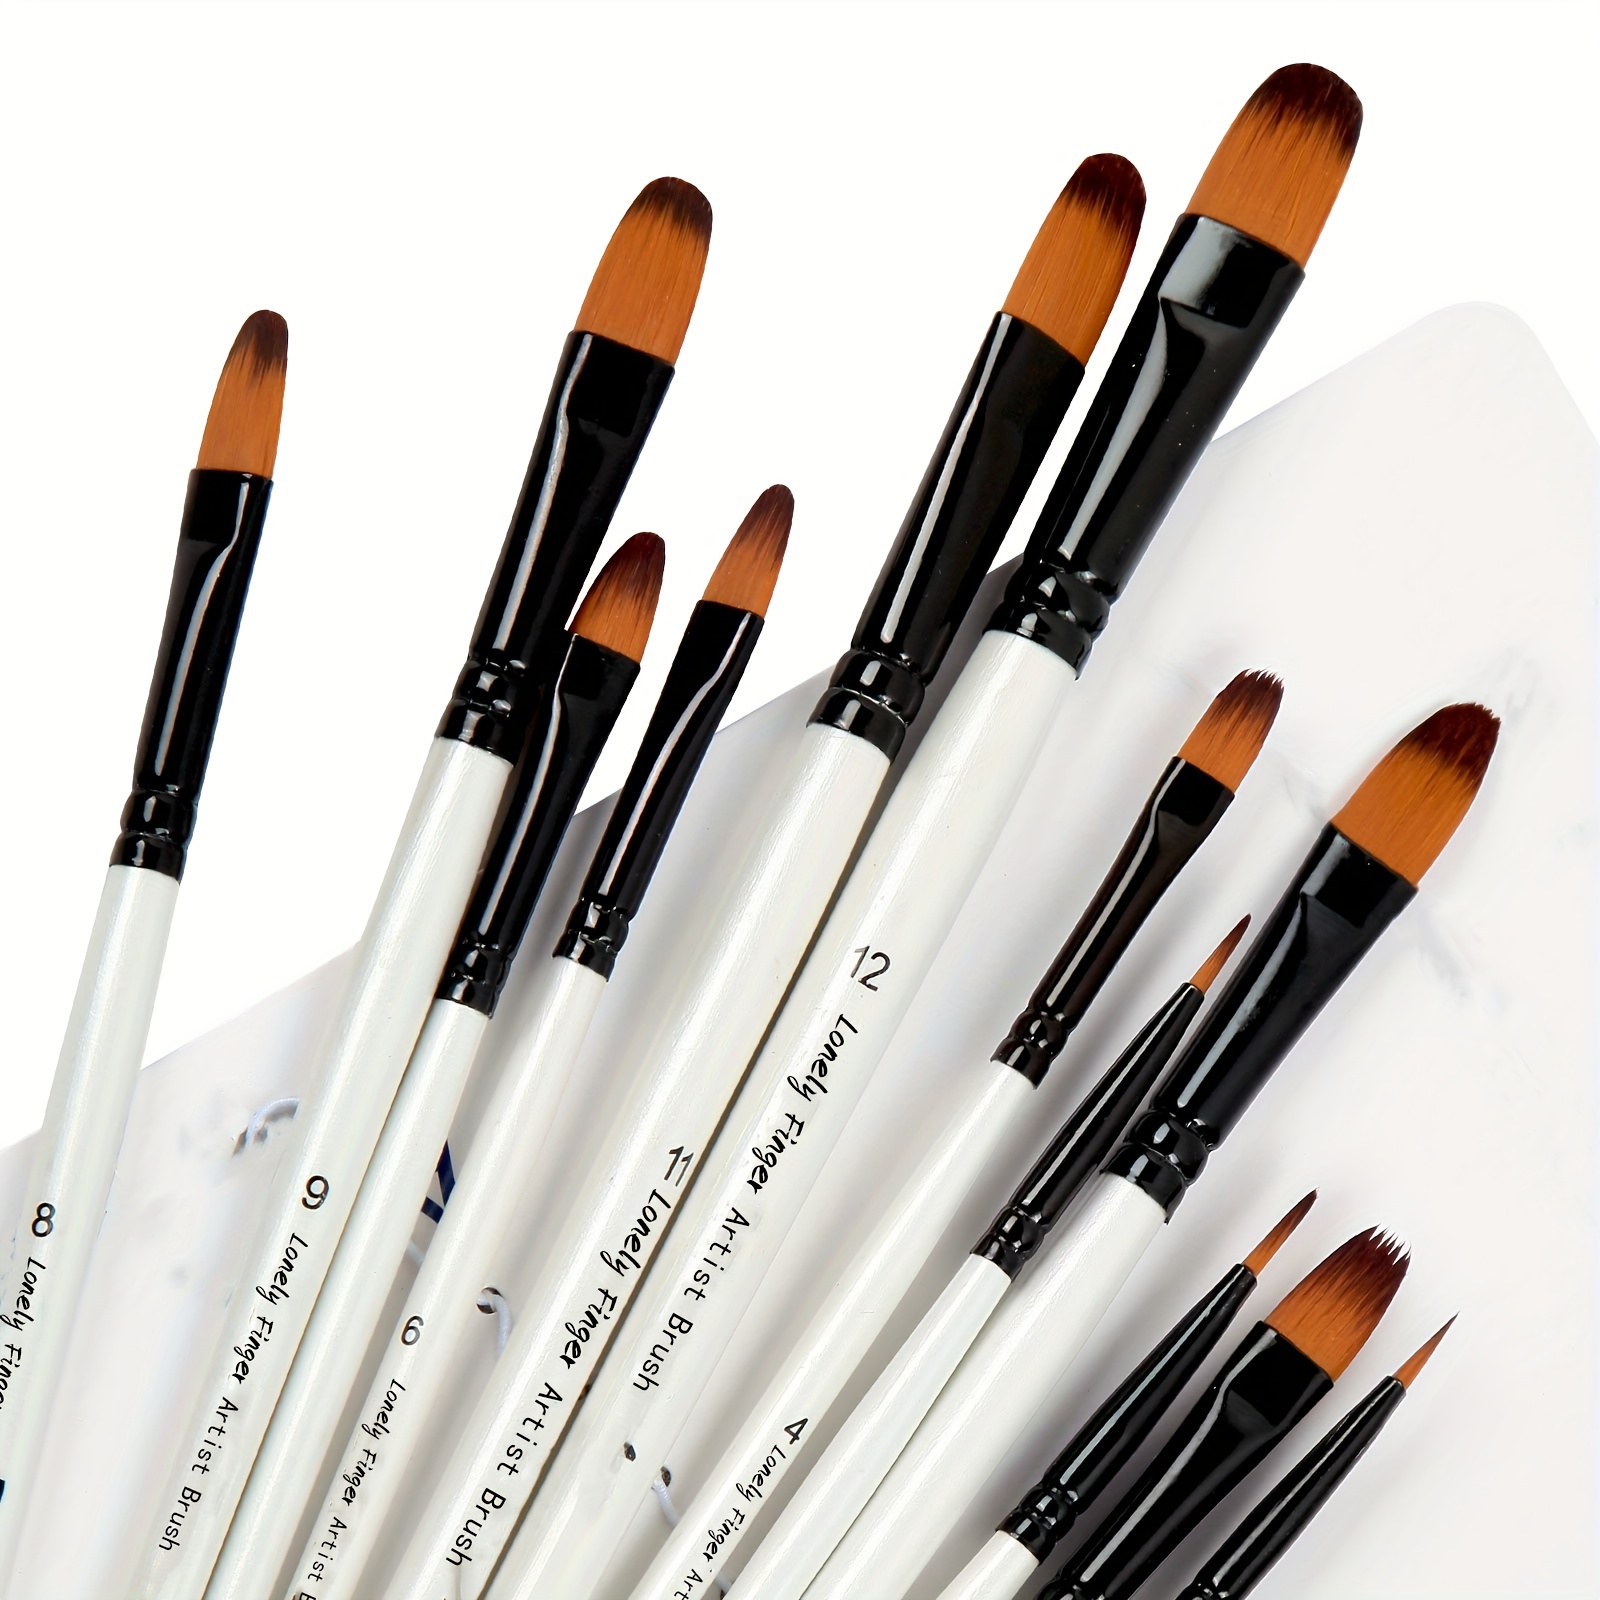 

12-piece Filbert Nylon Paint Brush Set For Acrylic, Oil, Watercolor Painting – Professional Artist Quality Brushes With Short Handles And Rust-free Ferrules